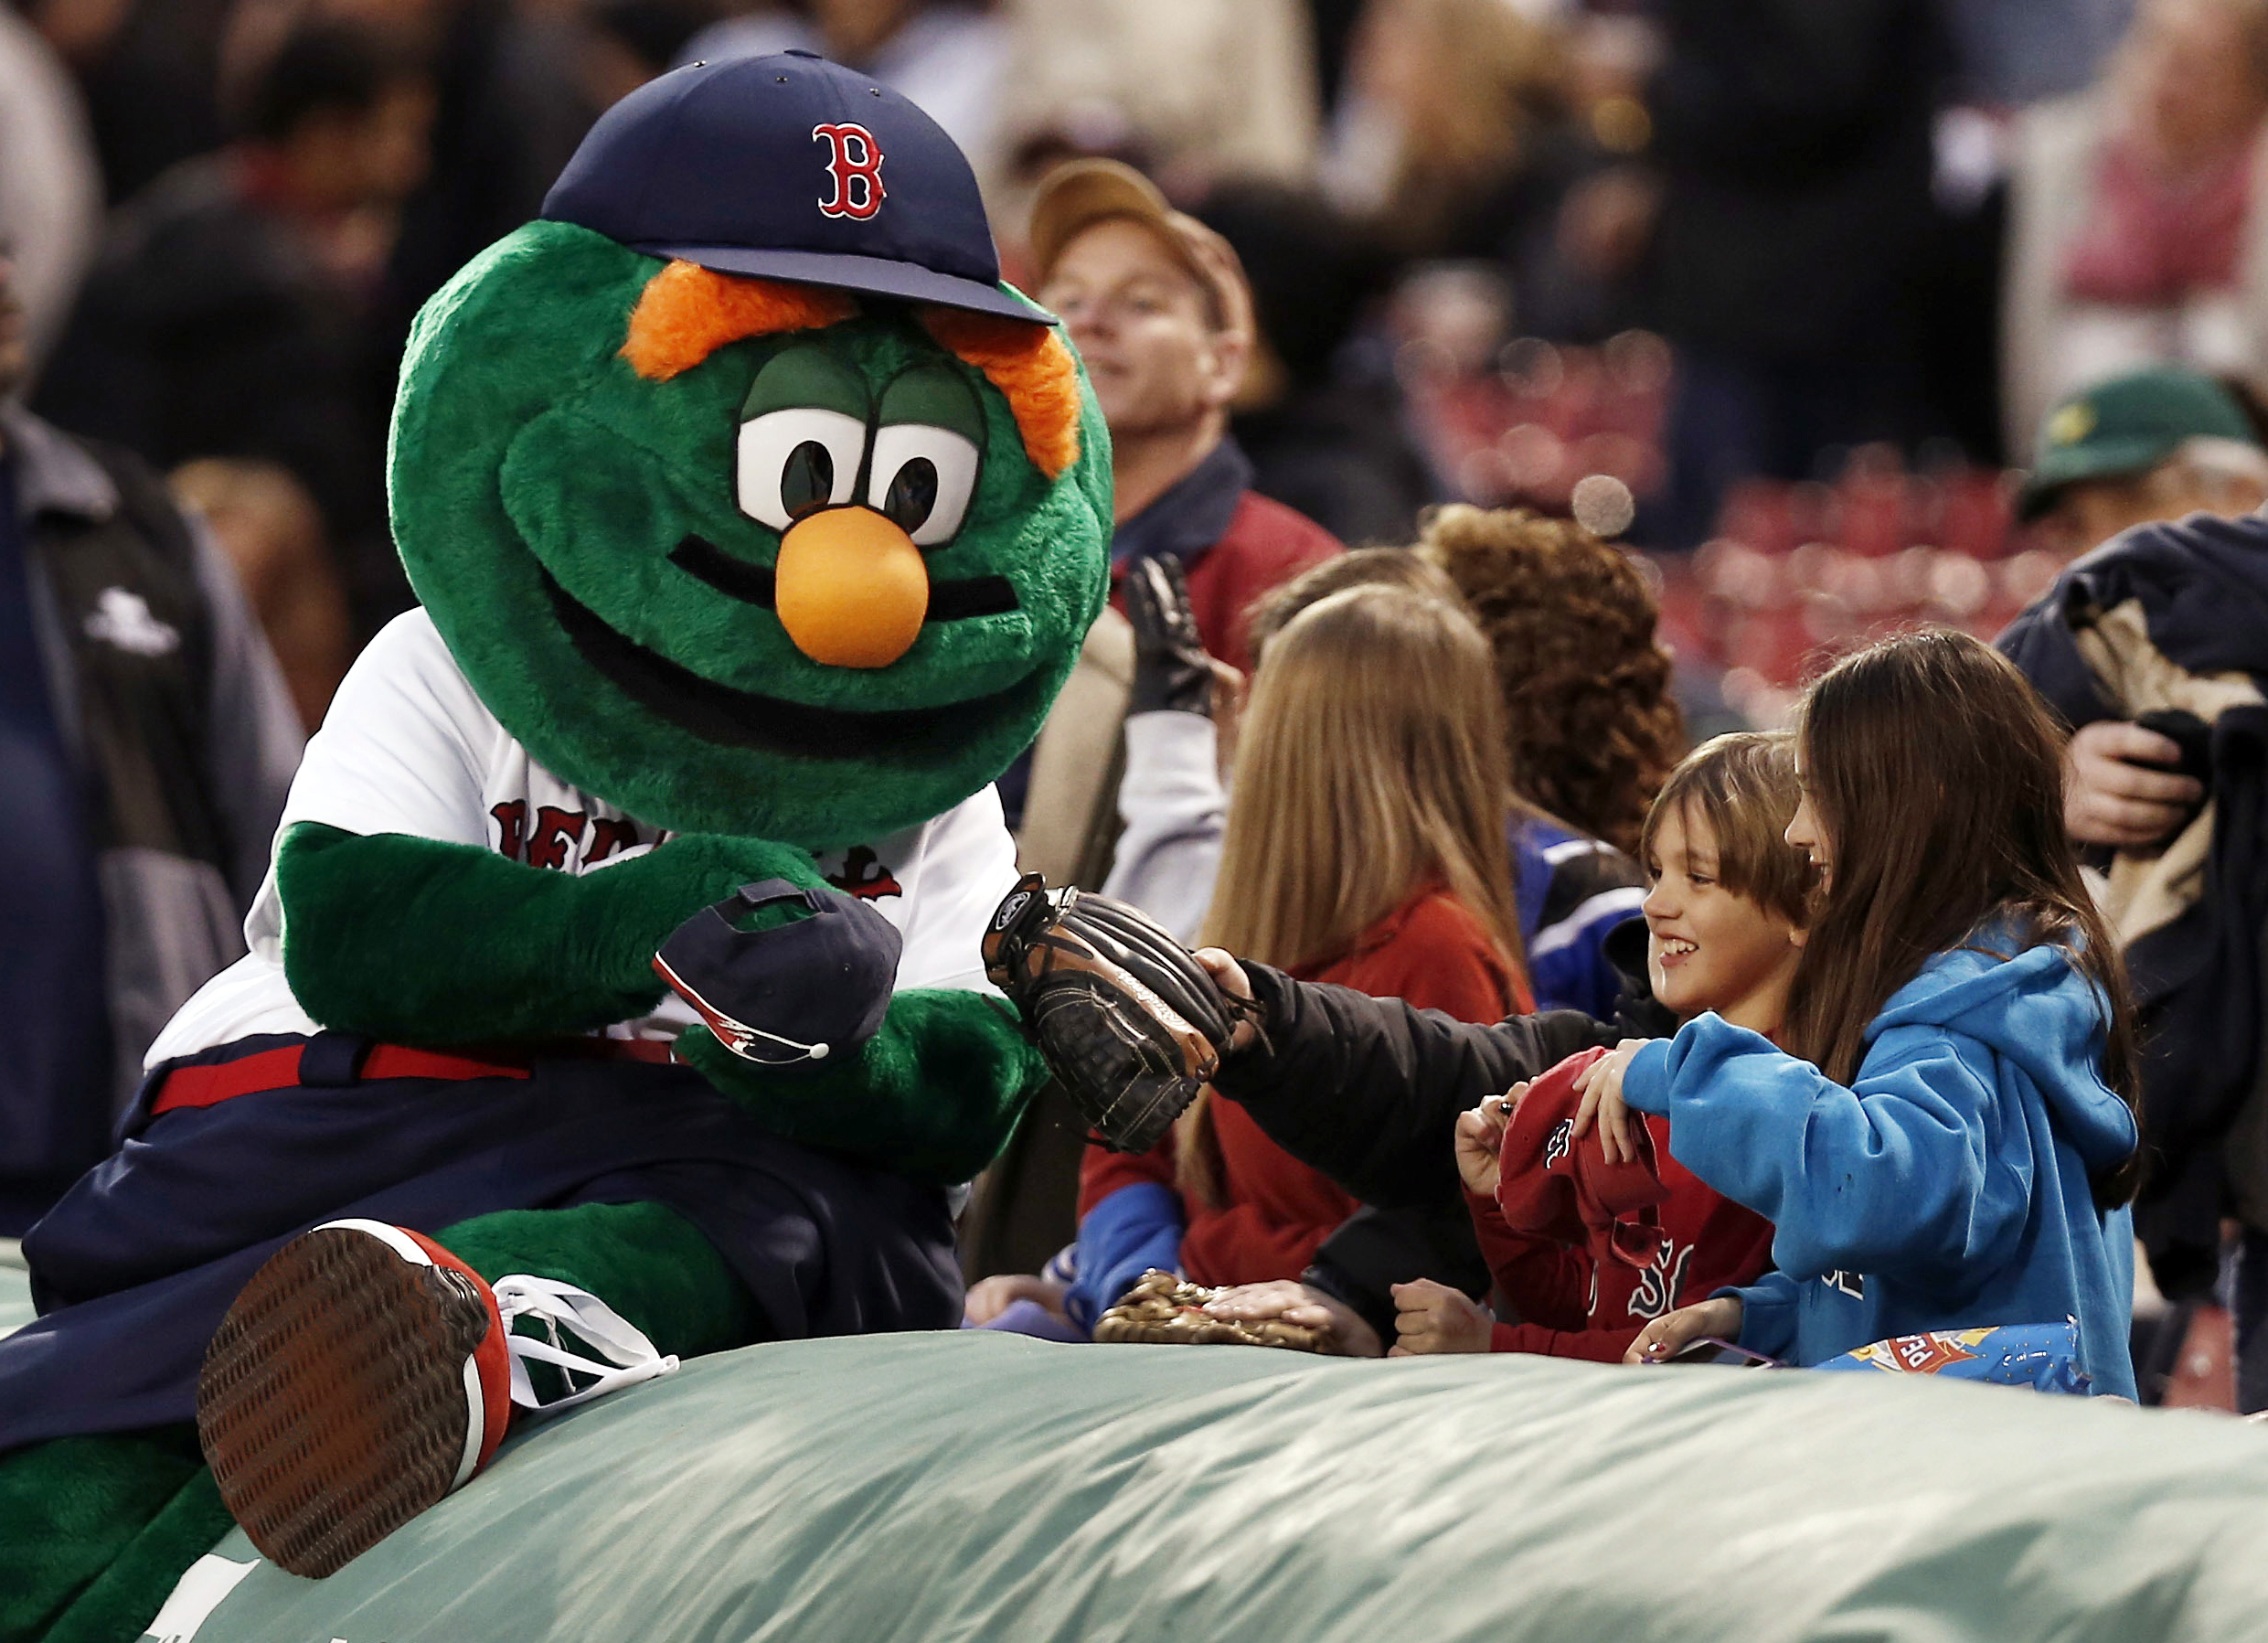 RedSox TeamStore on X: It's Red Sox Giveaway Day! The first KIDS to come  into Fenway Park this afternoon get a FREE Wally the Green Monster Pillow!  Make sure you use the